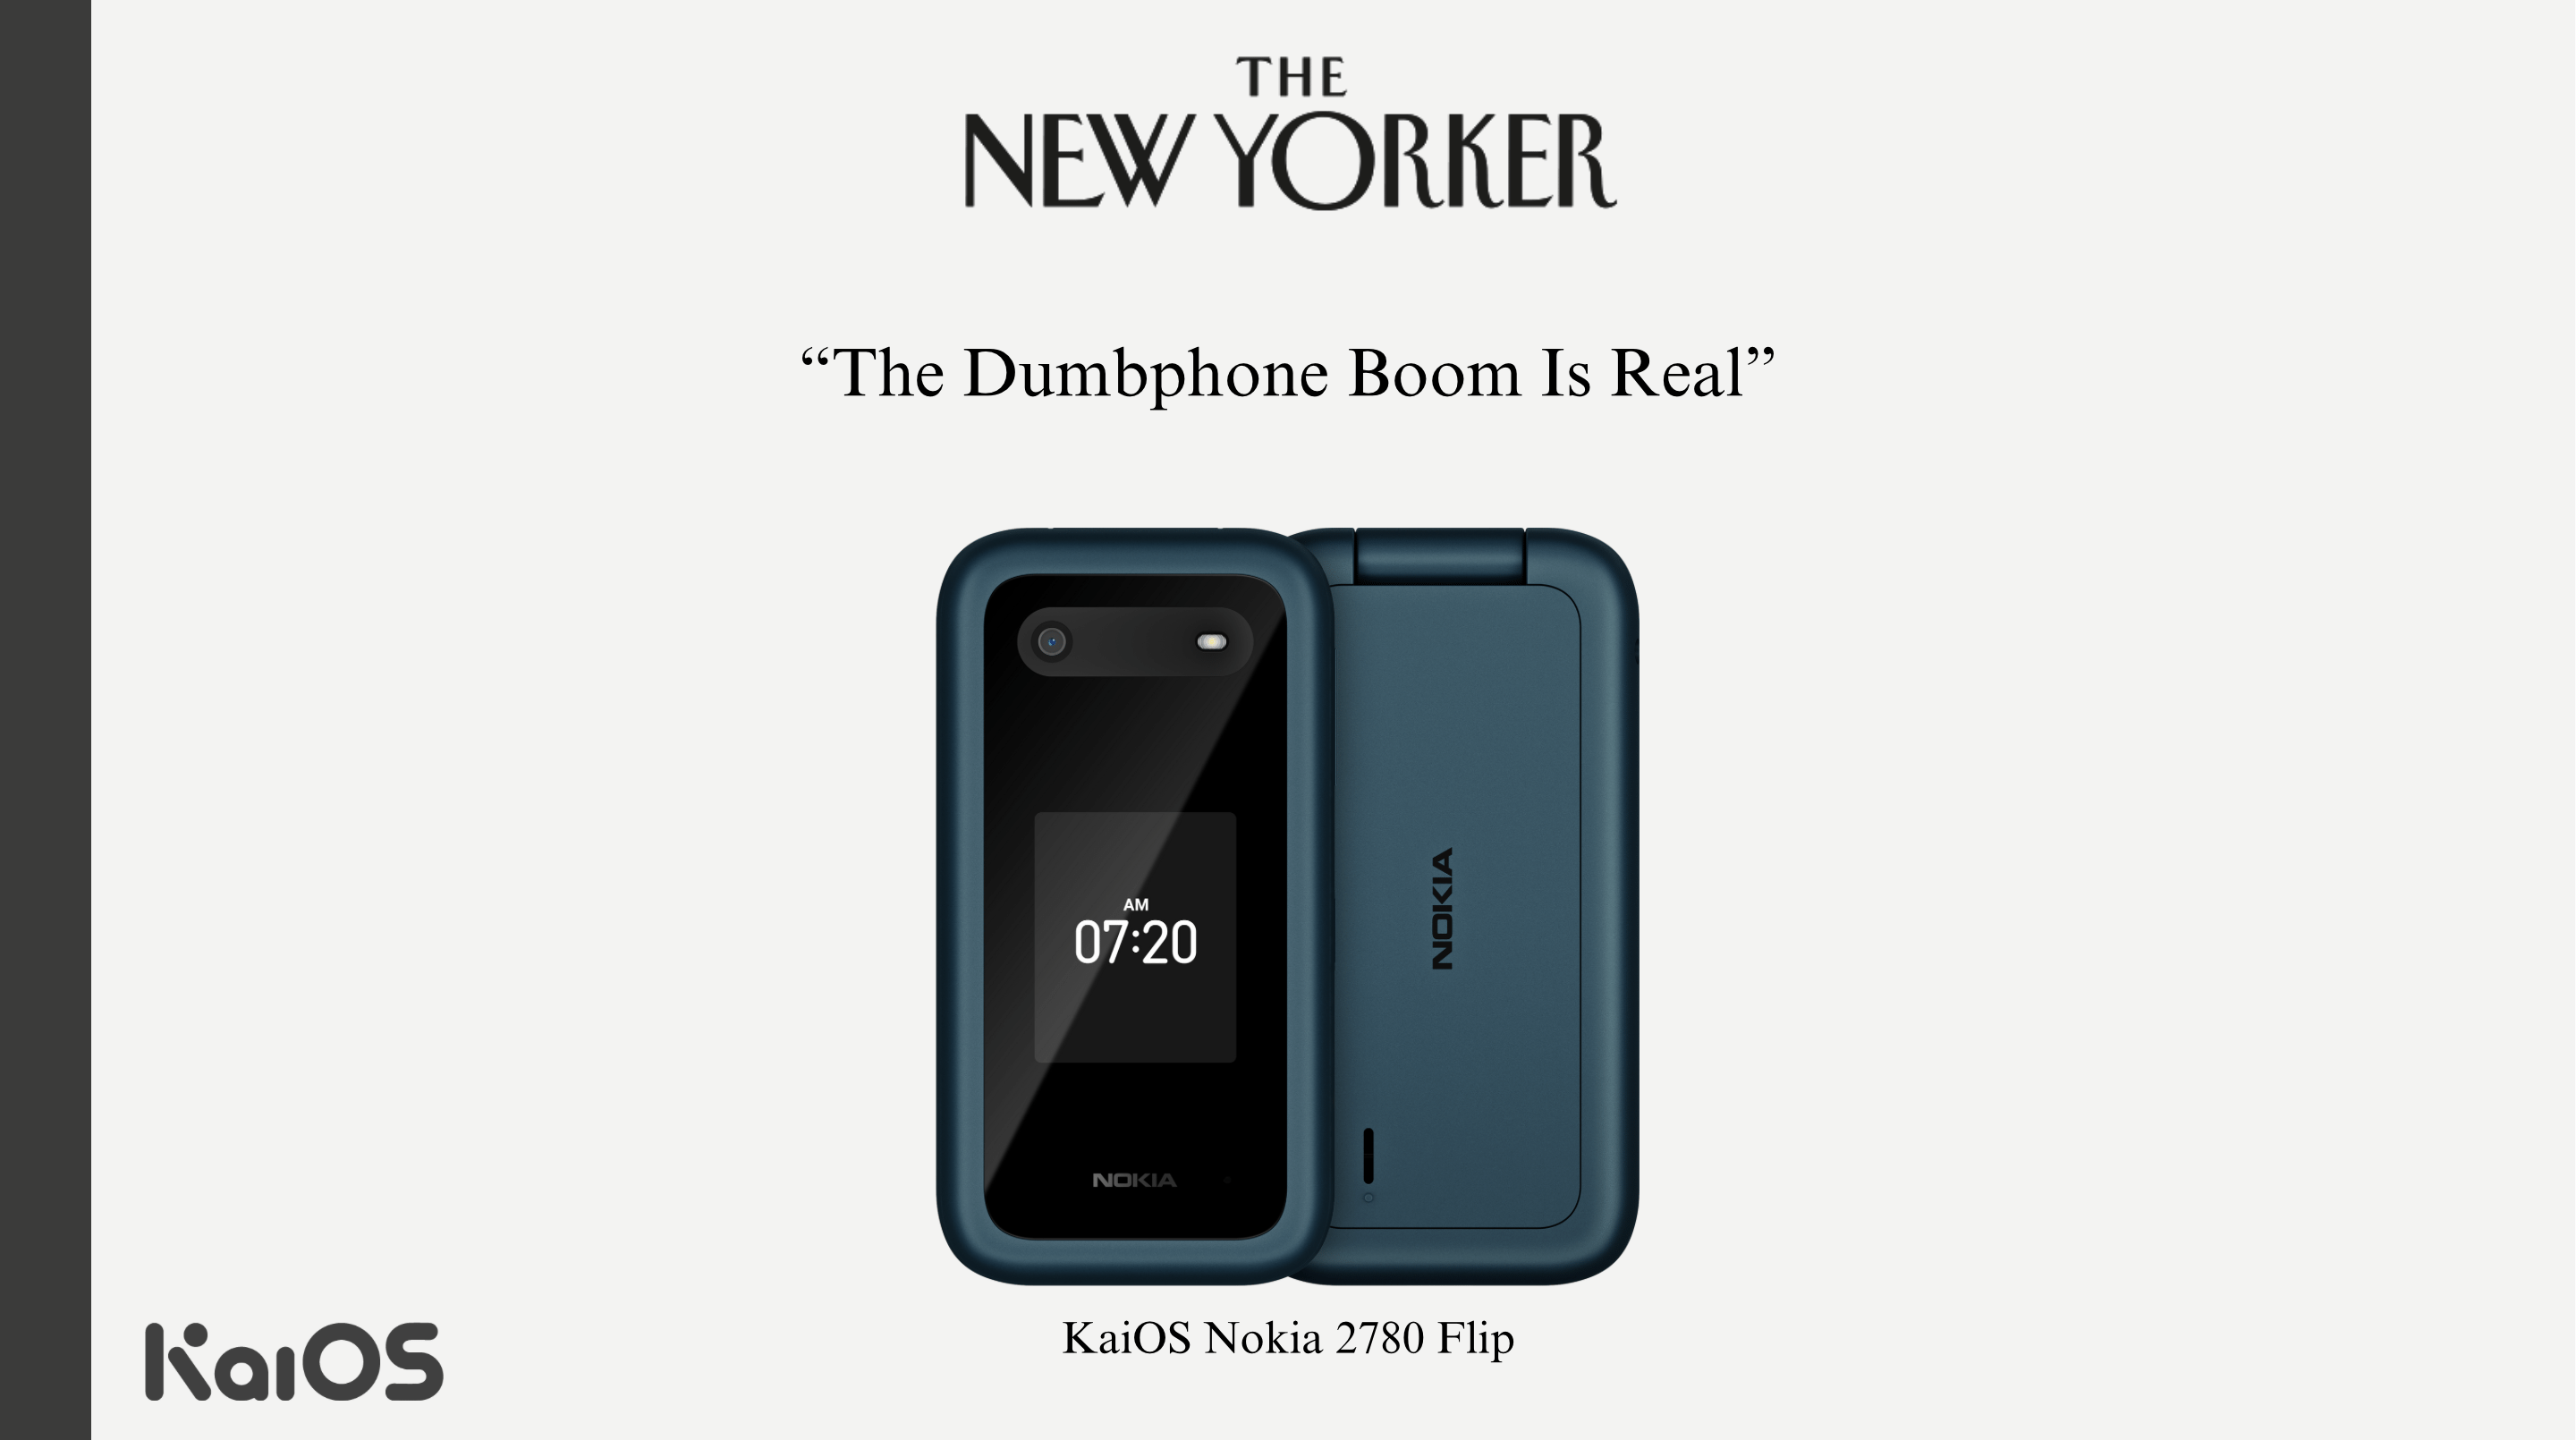 The Dumbphone Boom Is Real